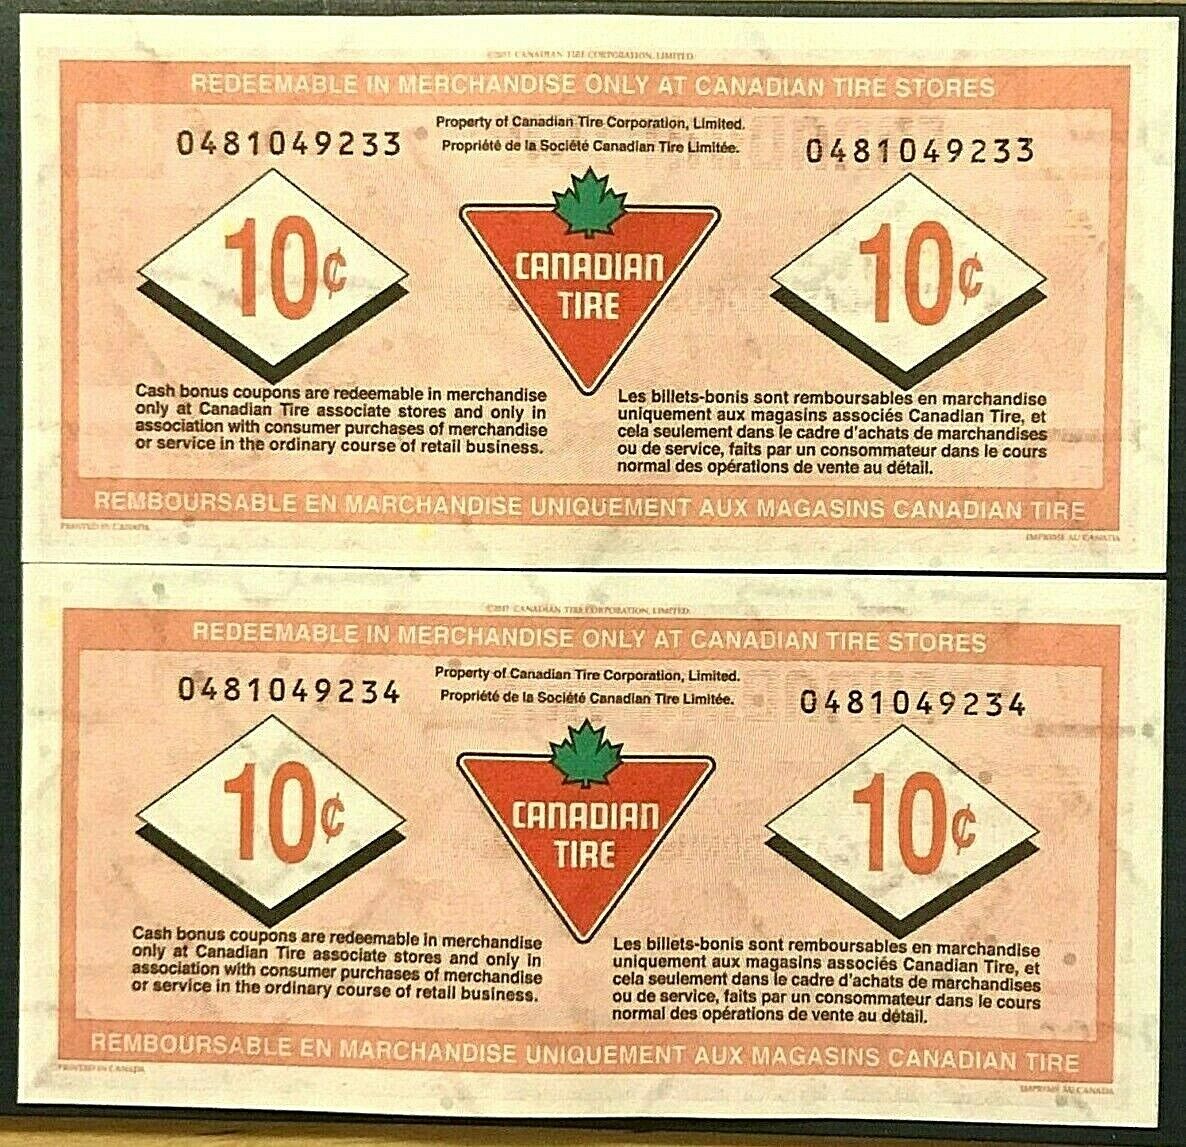 2017 10 Cent Canadian Tire Money - Consecutive Serial #'s - 0481049233 / 0481049 Без бренда